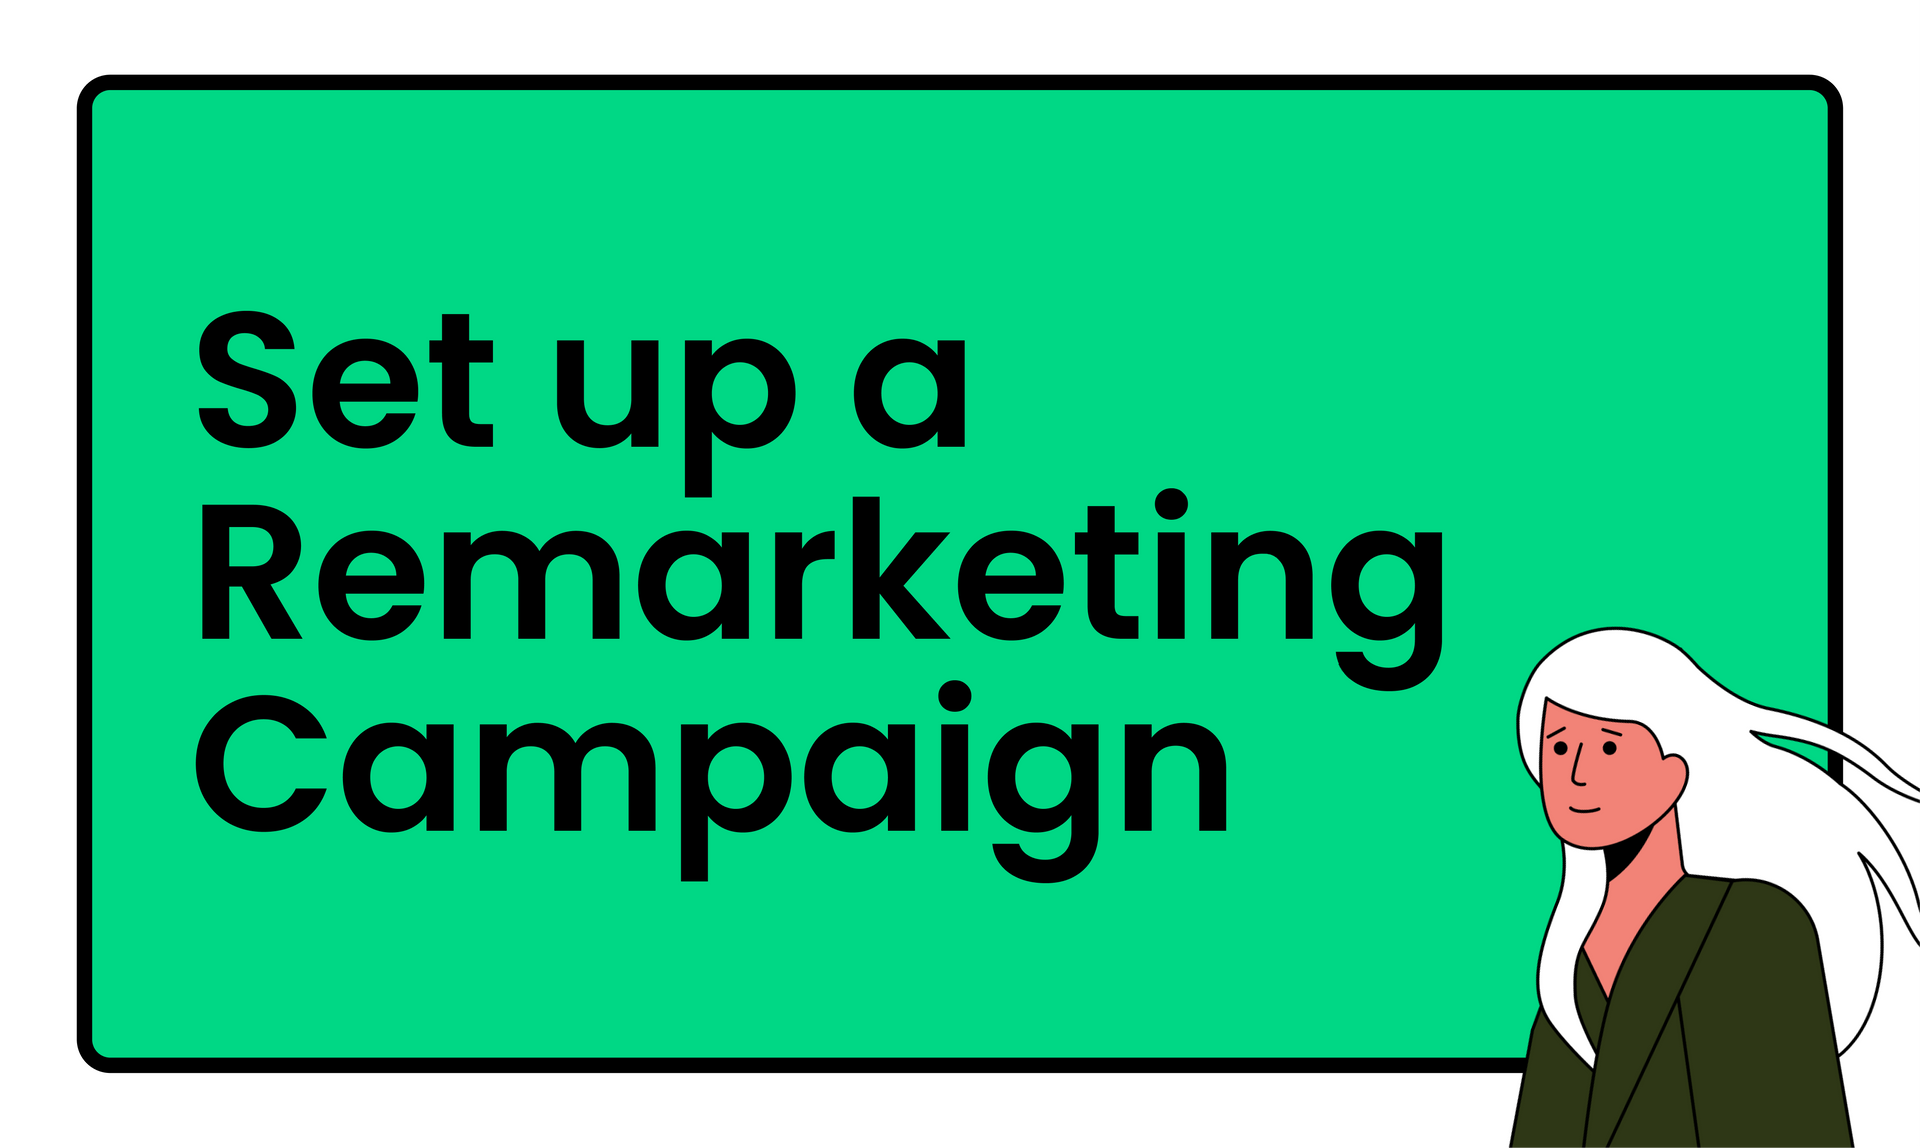 Set up a Remarketing Campaign